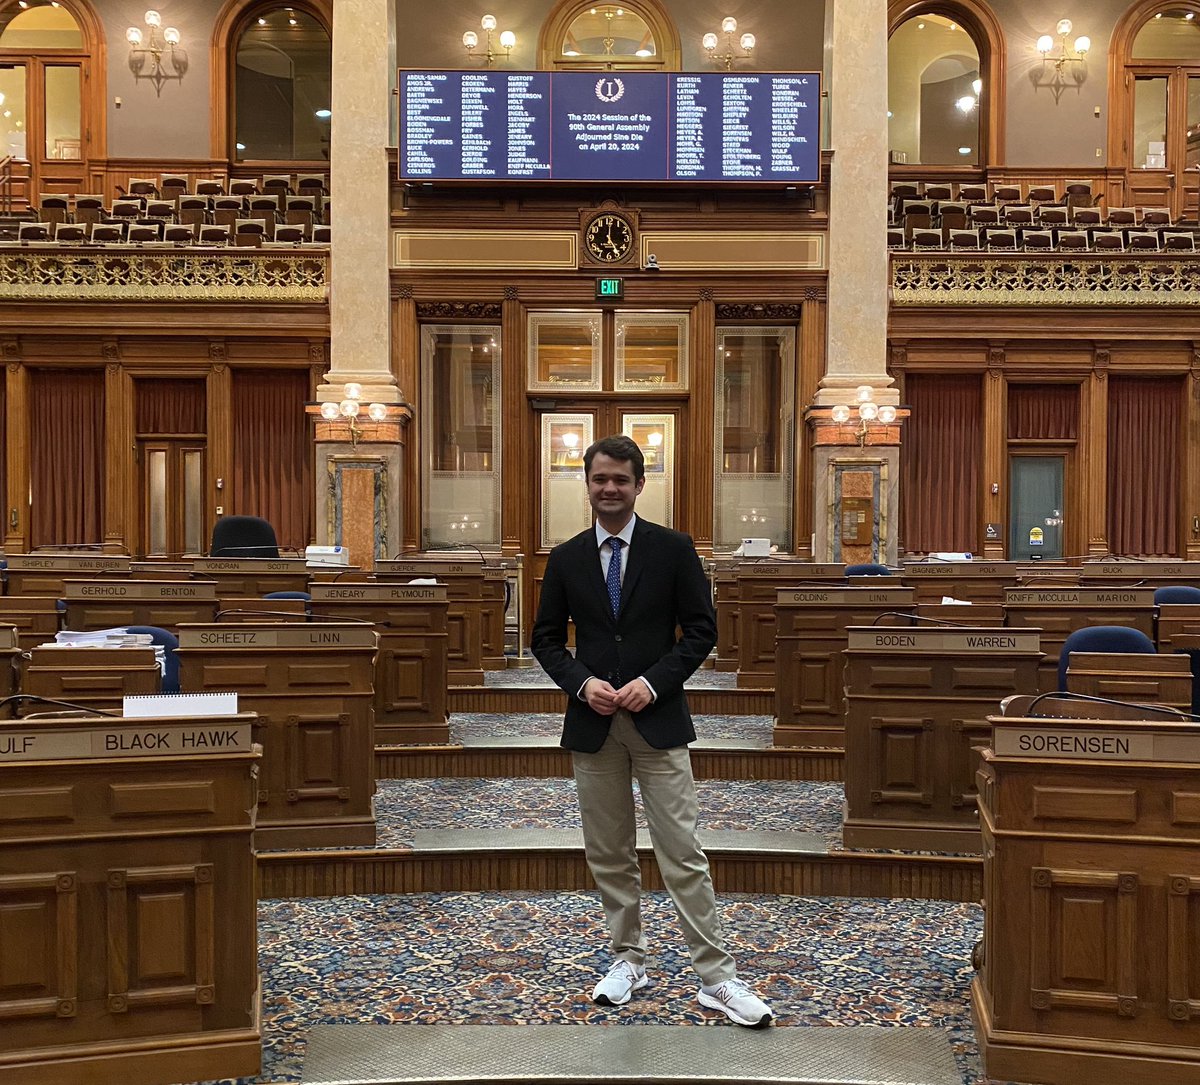 After a marathon 23 hour day, my first Iowa legislative session has adjourned sine die! 

I’d like to give a special shoutout to Red Bull and @idaveprice for helping me get through it. #ialegis